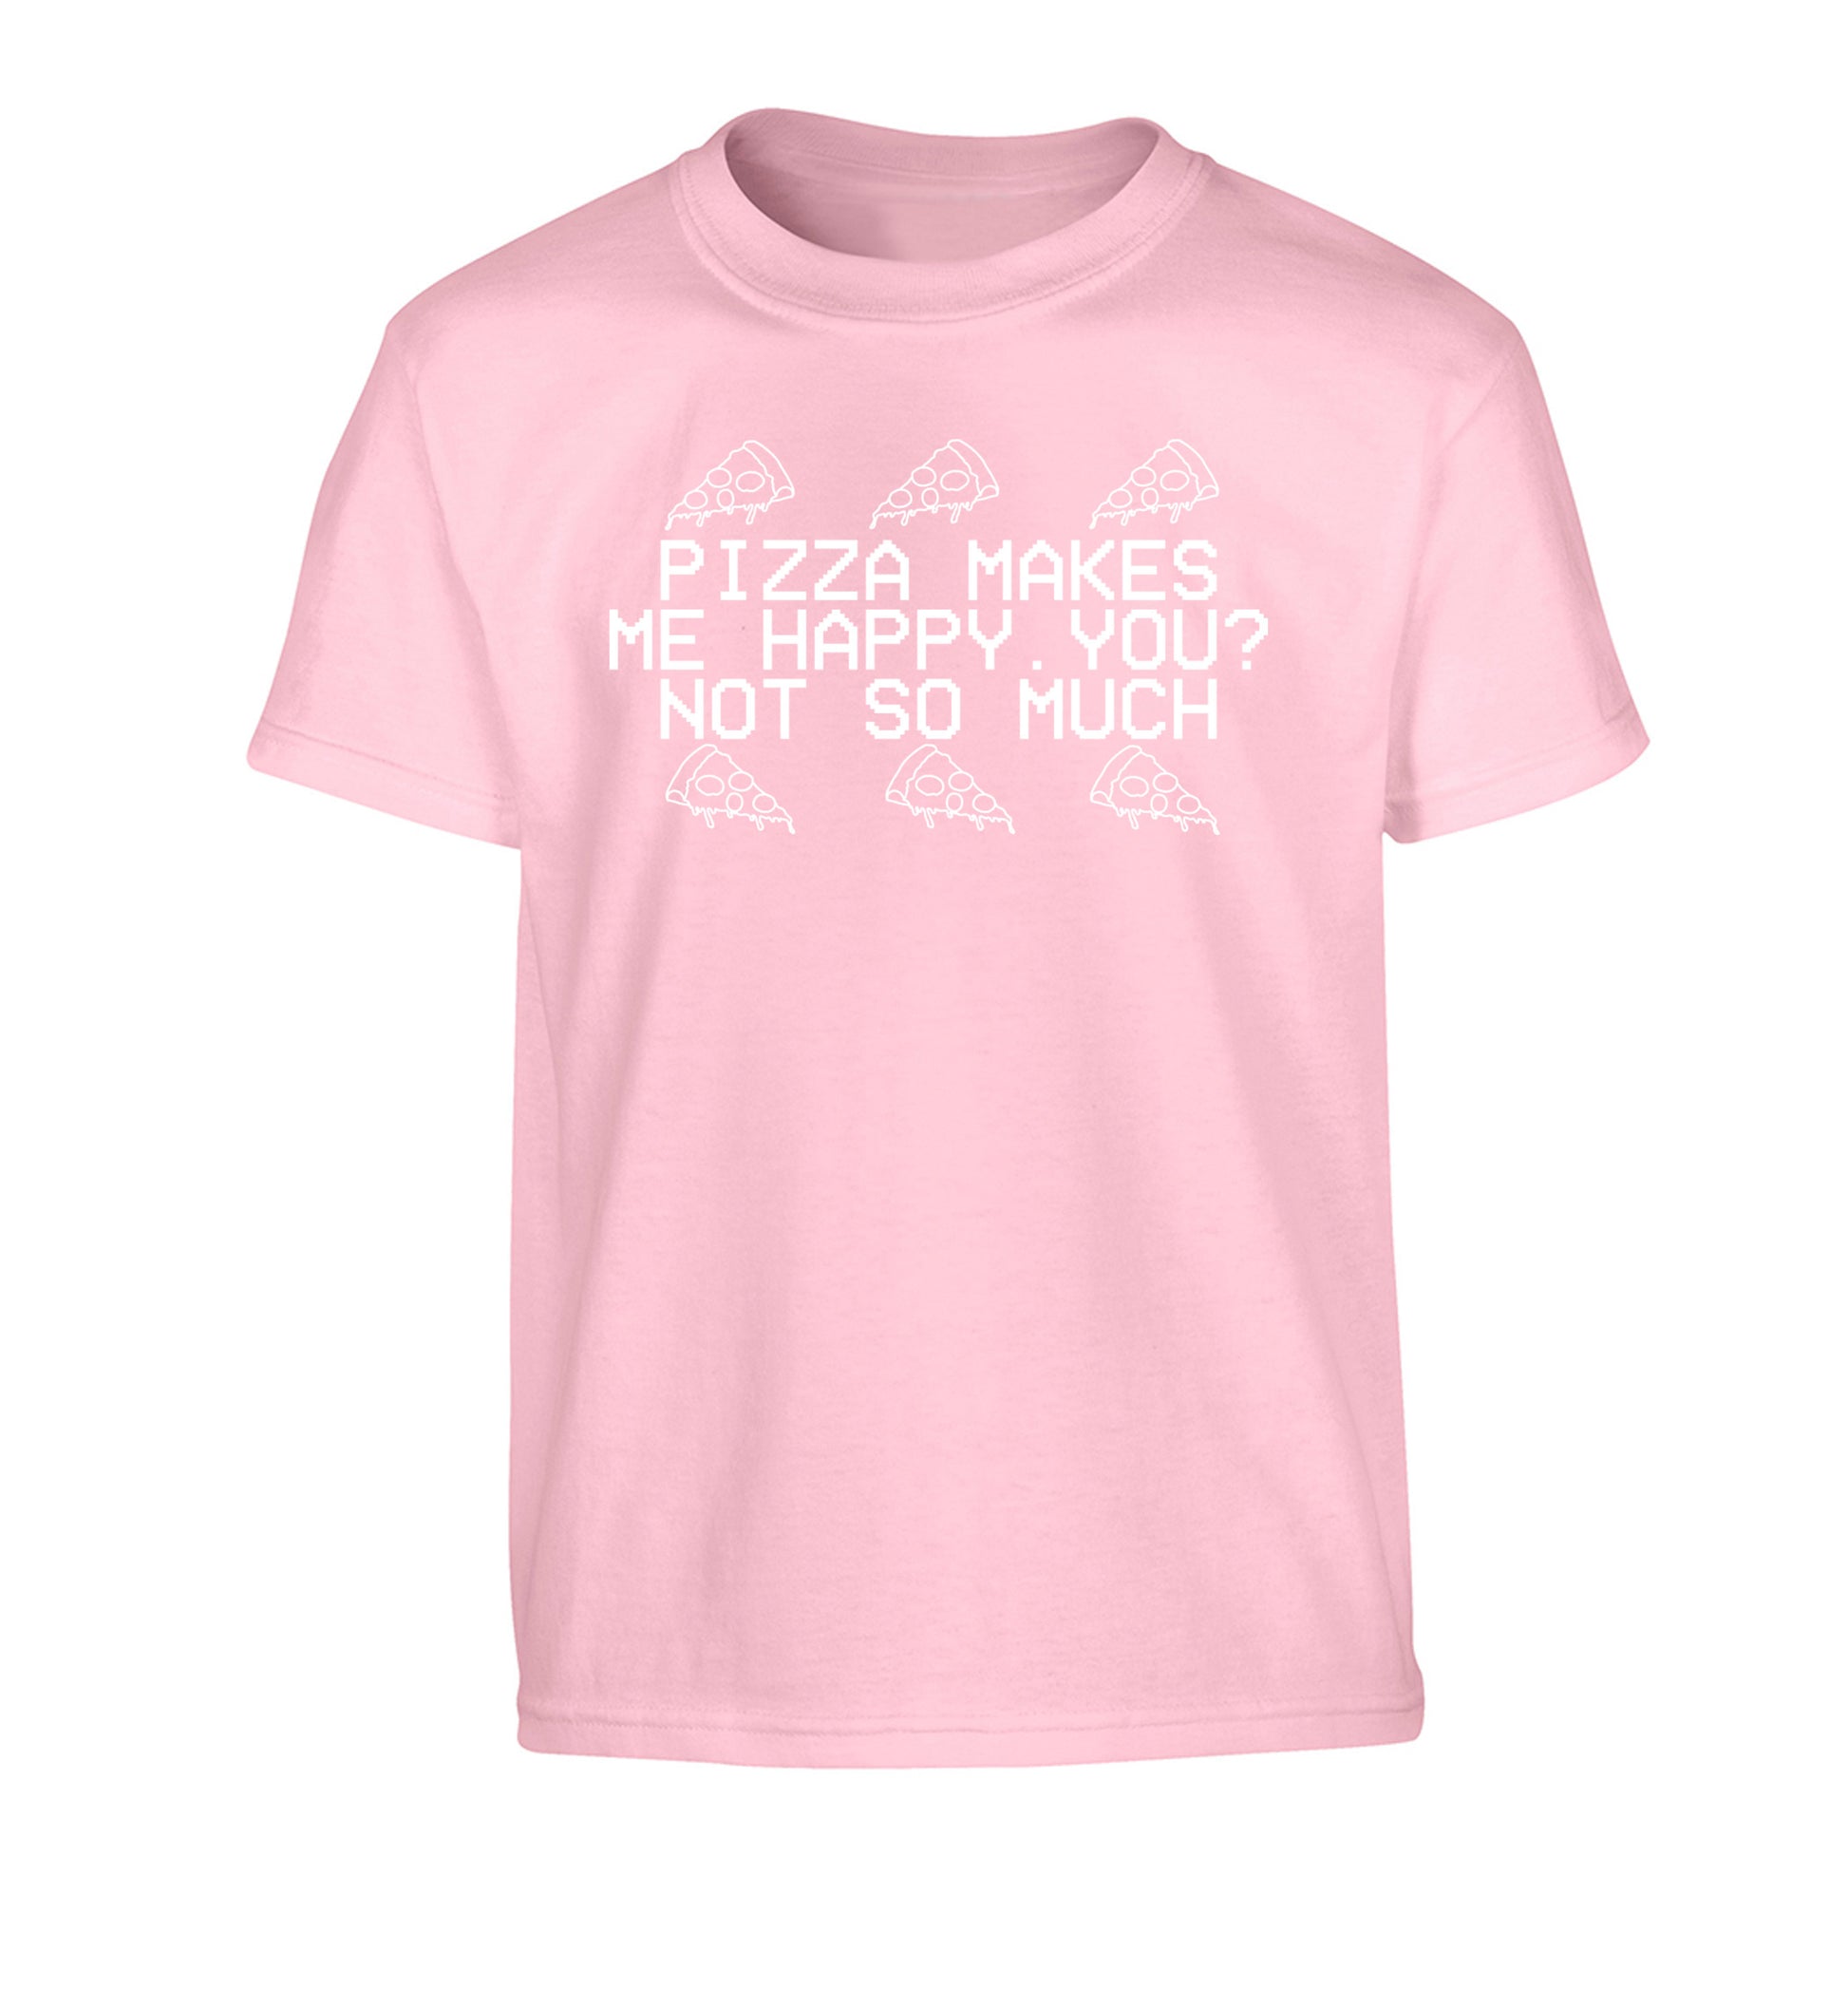 Pizza makes me happy, You? Not so much Children's light pink Tshirt 12-14 Years